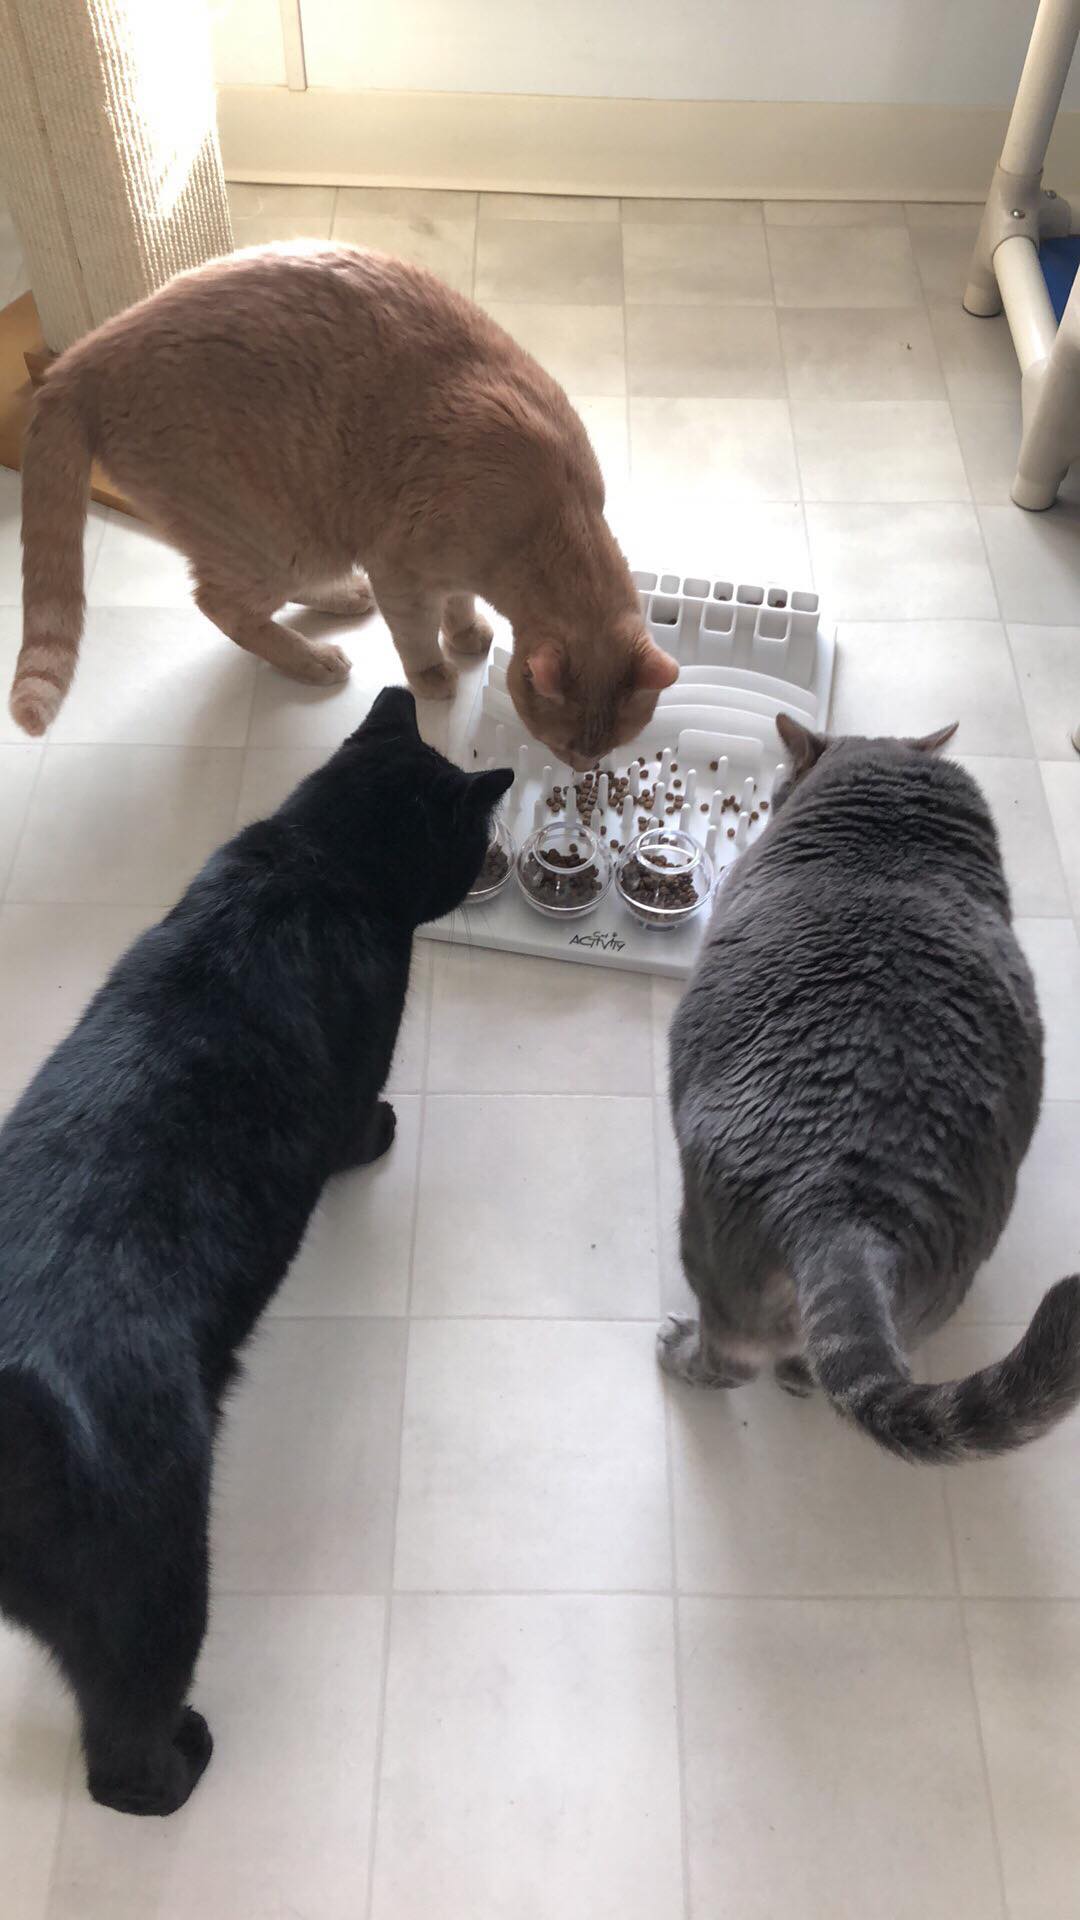 3 cats using a food puzzle